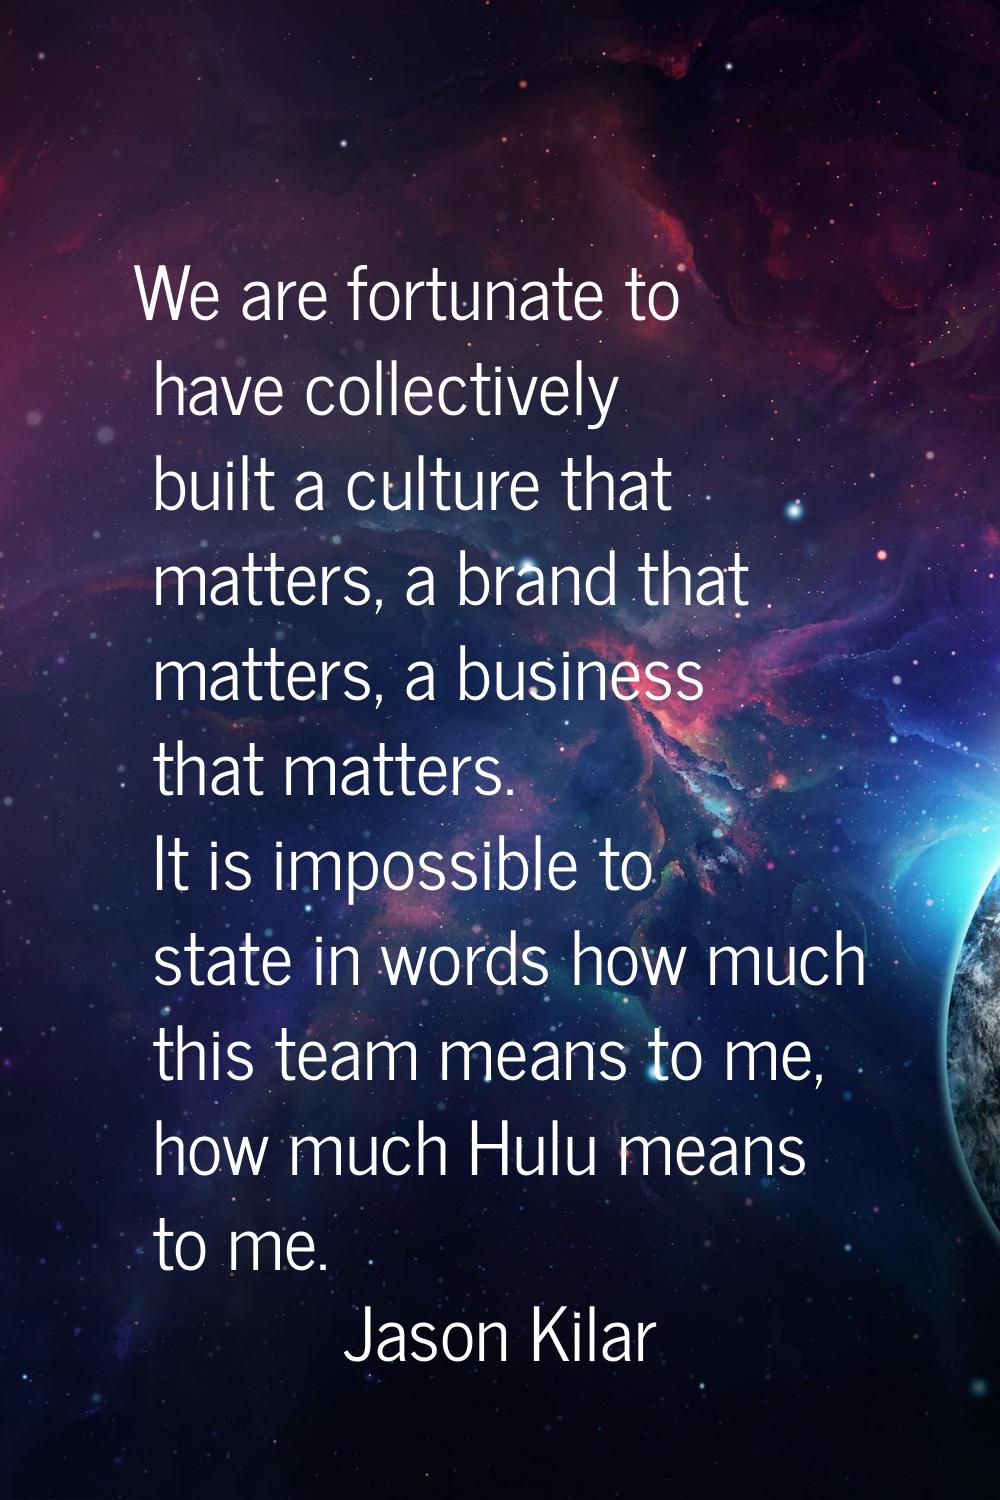 We are fortunate to have collectively built a culture that matters, a brand that matters, a busines